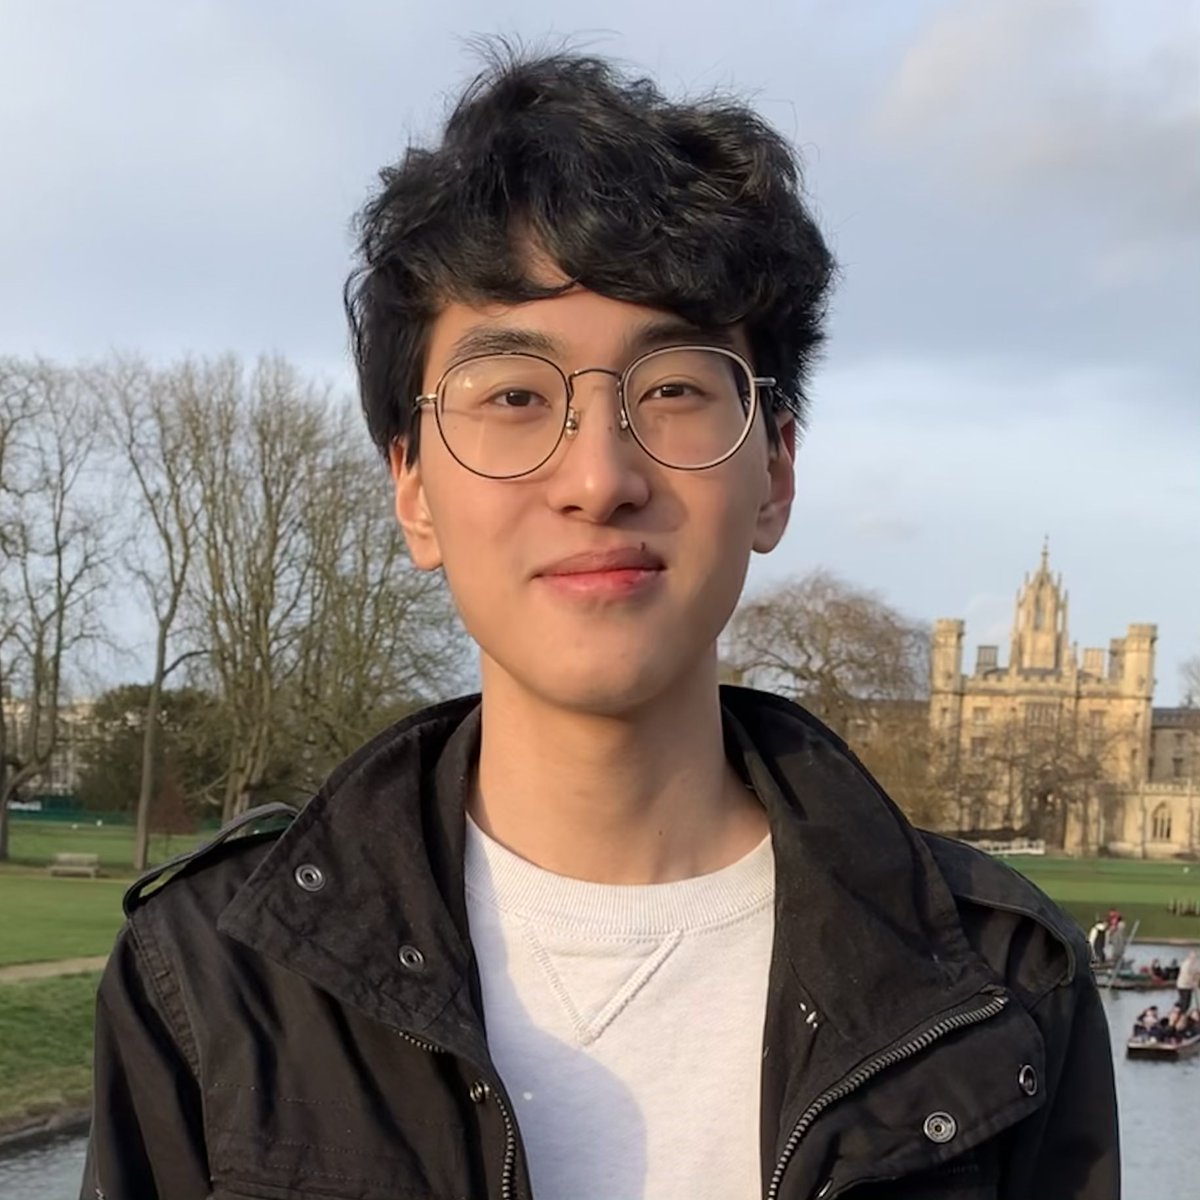 test Twitter Media - And the winner of the National Poetry Competition 2021 is... Eric Yip for his poem 'Fricatives'! #NPCAwards2021 https://t.co/HSruDmqdc3 https://t.co/JxF4kopzJj